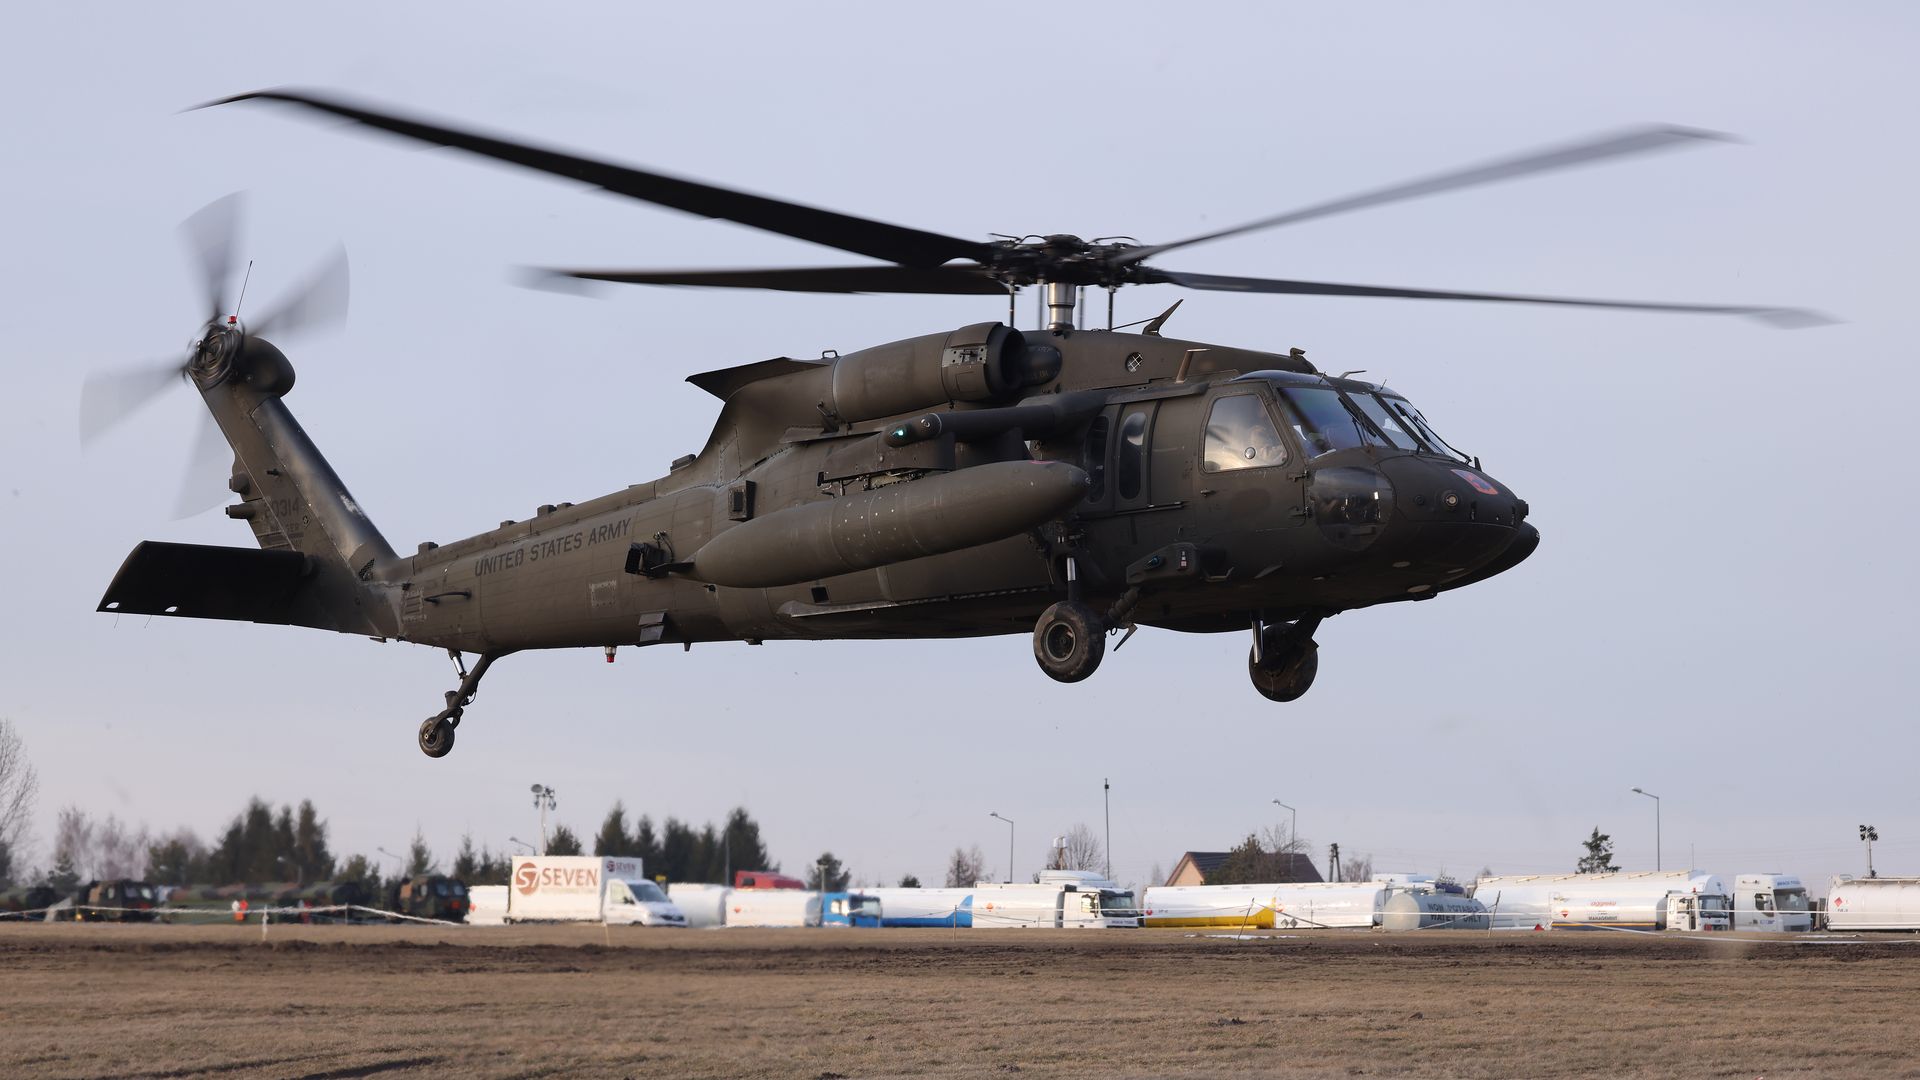 A UH-60 Black Hawk military helicopter of the U.S. Army takes off after refueling at an airfield currently being used by the Army's 82nd Airborne Division on March 01, 2022 in Zamosc, Poland. 